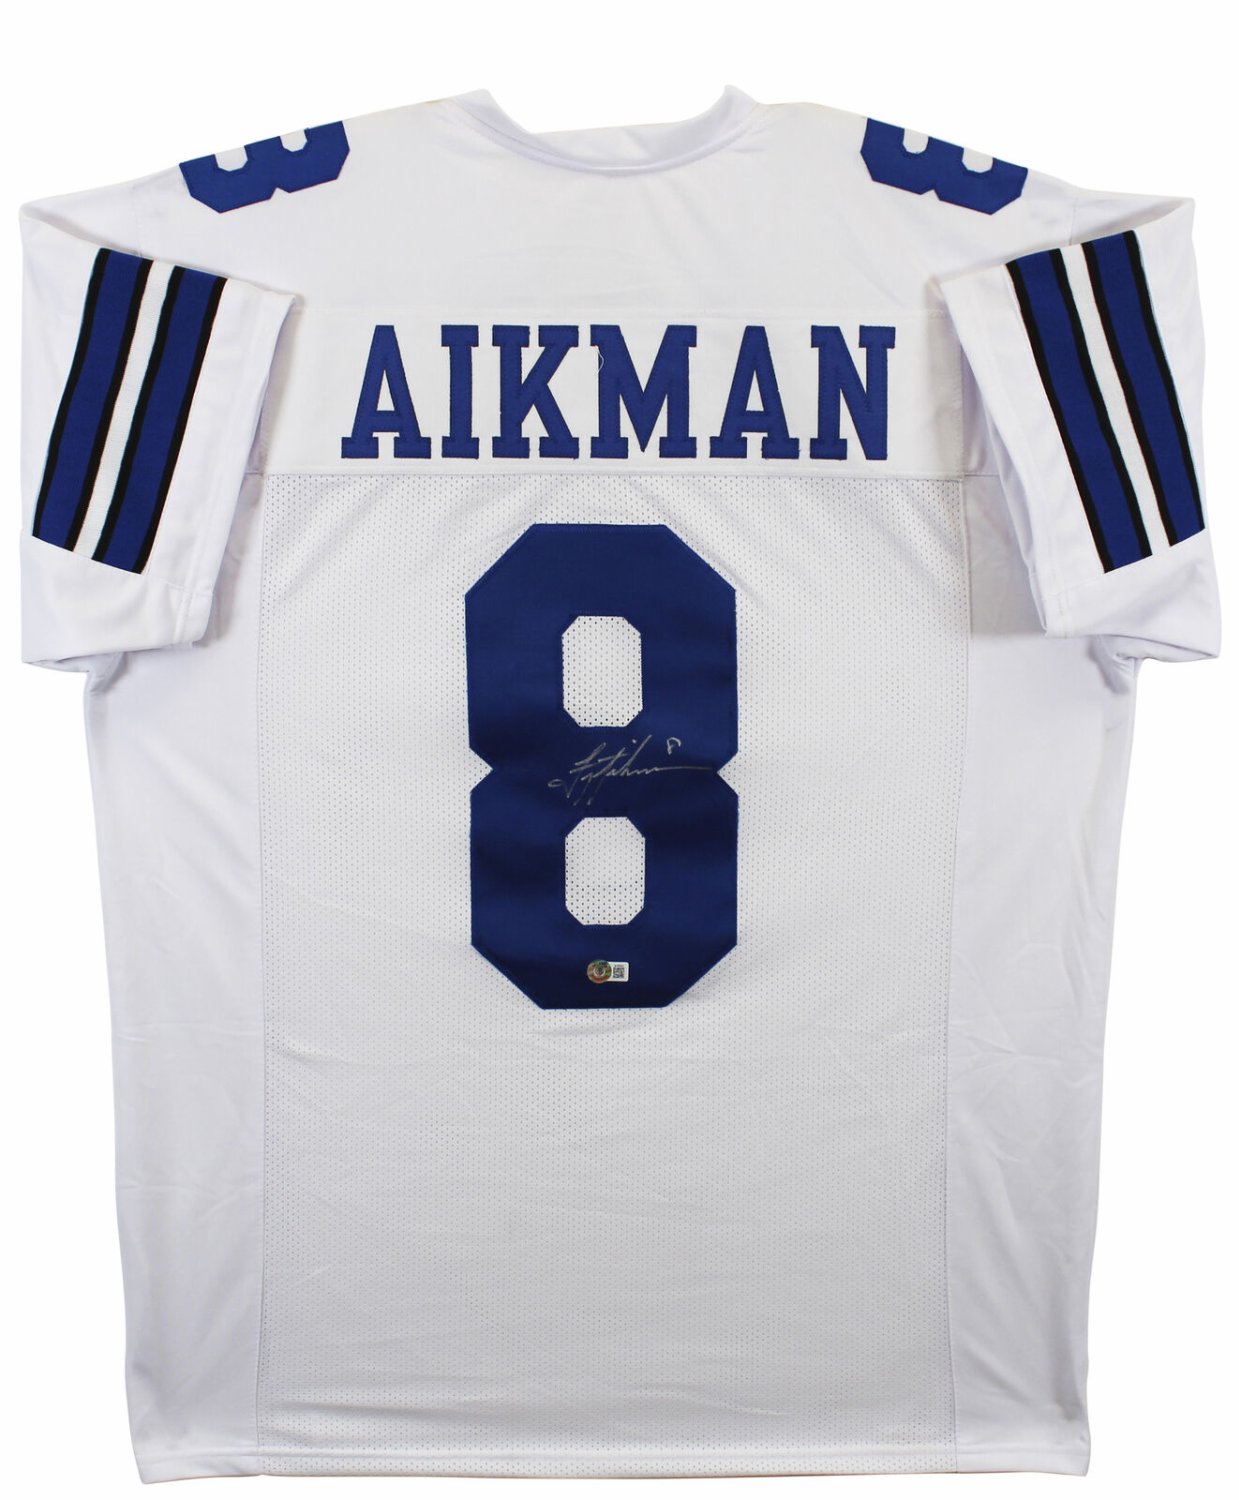 Troy Aikman Autographed Dallas Cowboys Jersey Framed